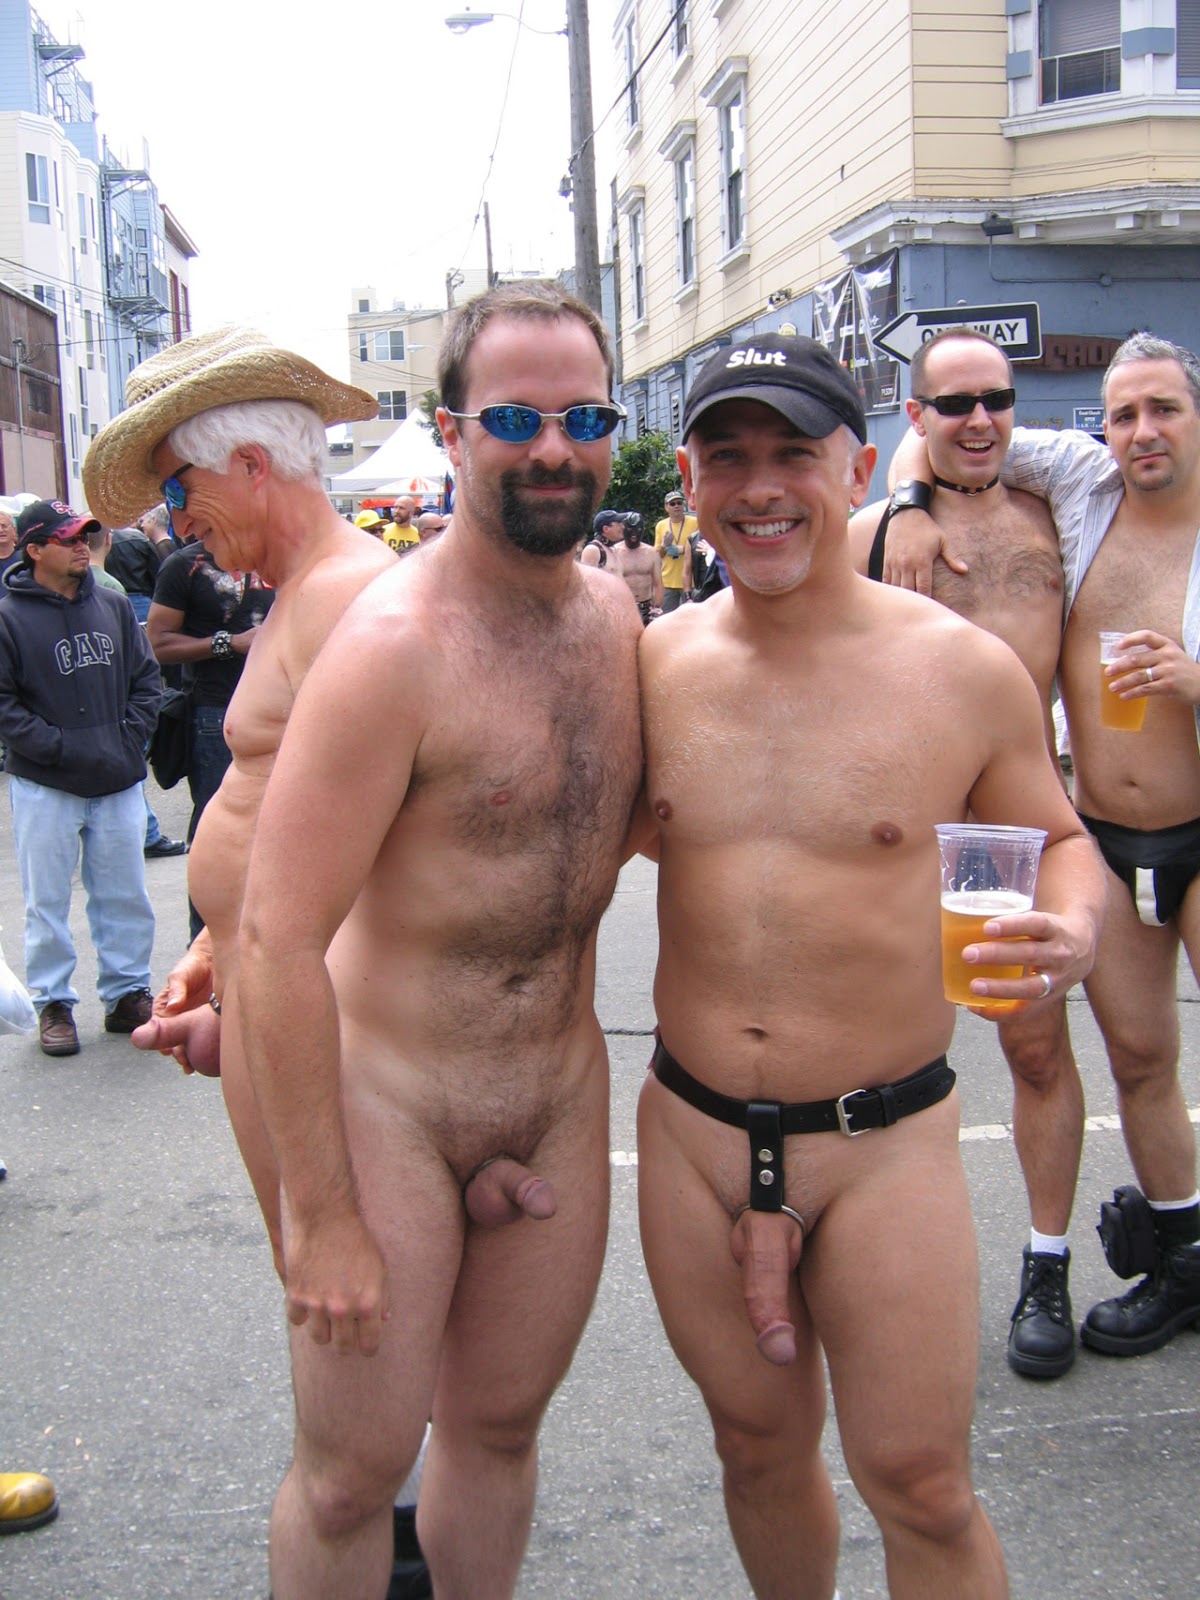 Naked in public with flasing and body art scenes. 